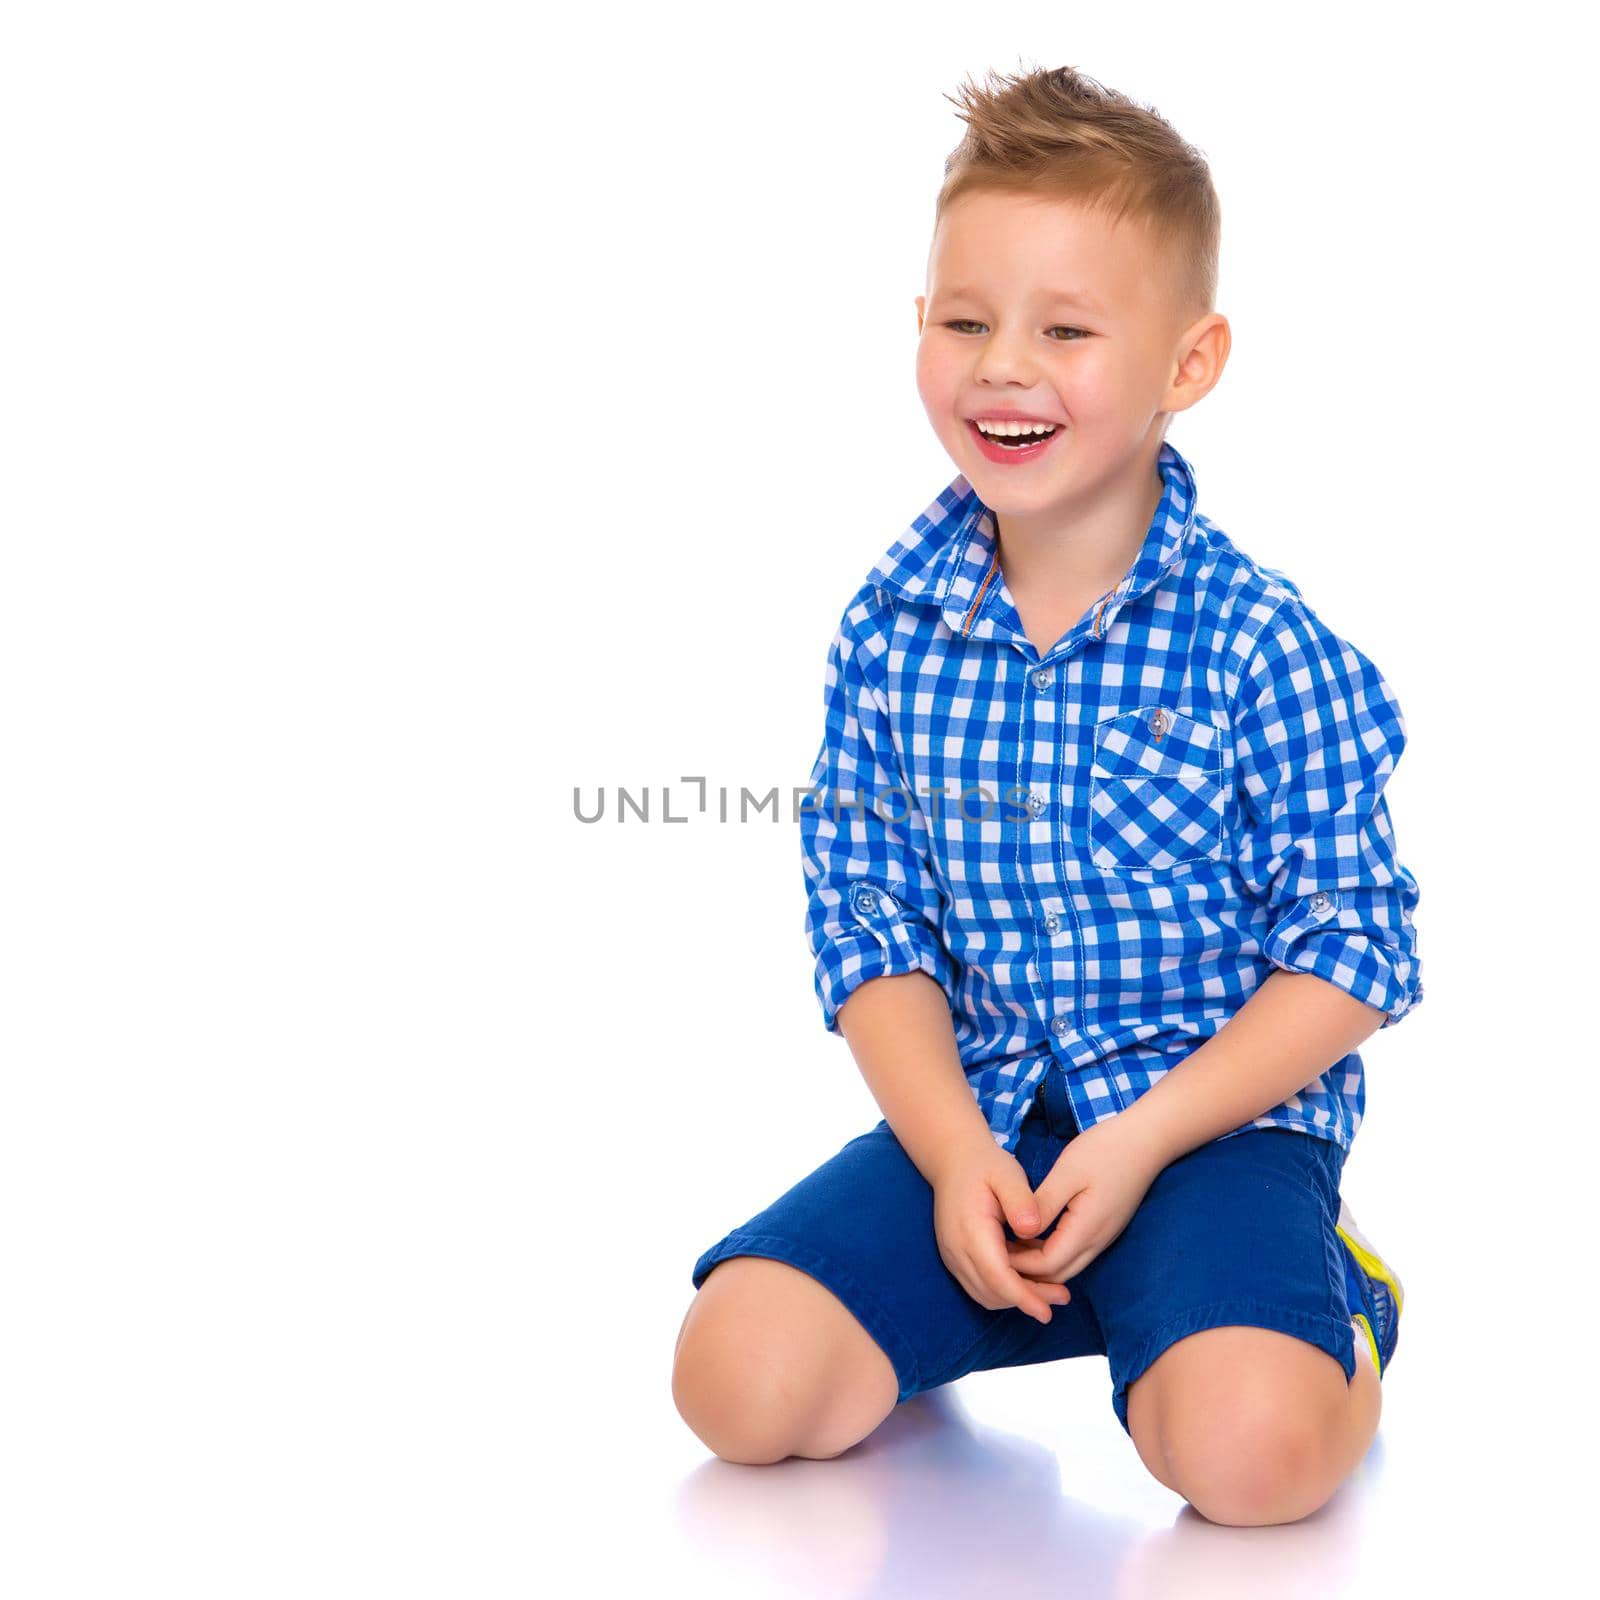 A beautiful little boy laughs fun. The concept of a happy childhood, well-being and family values. Isolated on white background.